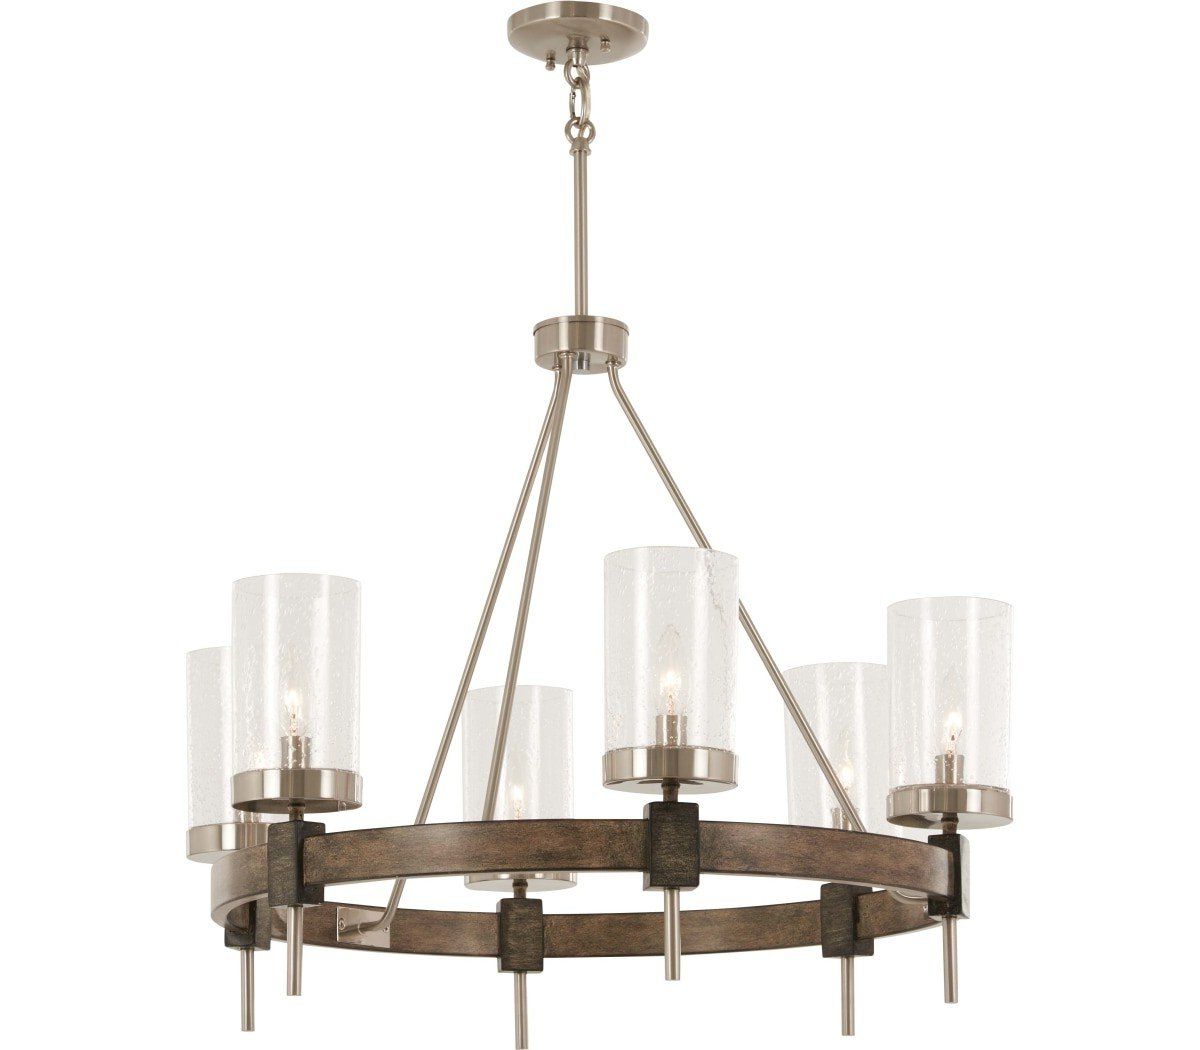 Widely Used Minka Lavery 4638 106 Bridlewood 8 Light Stone Grey Inside Stone Grey With Brushed Nickel Six Light Chandeliers (View 5 of 20)